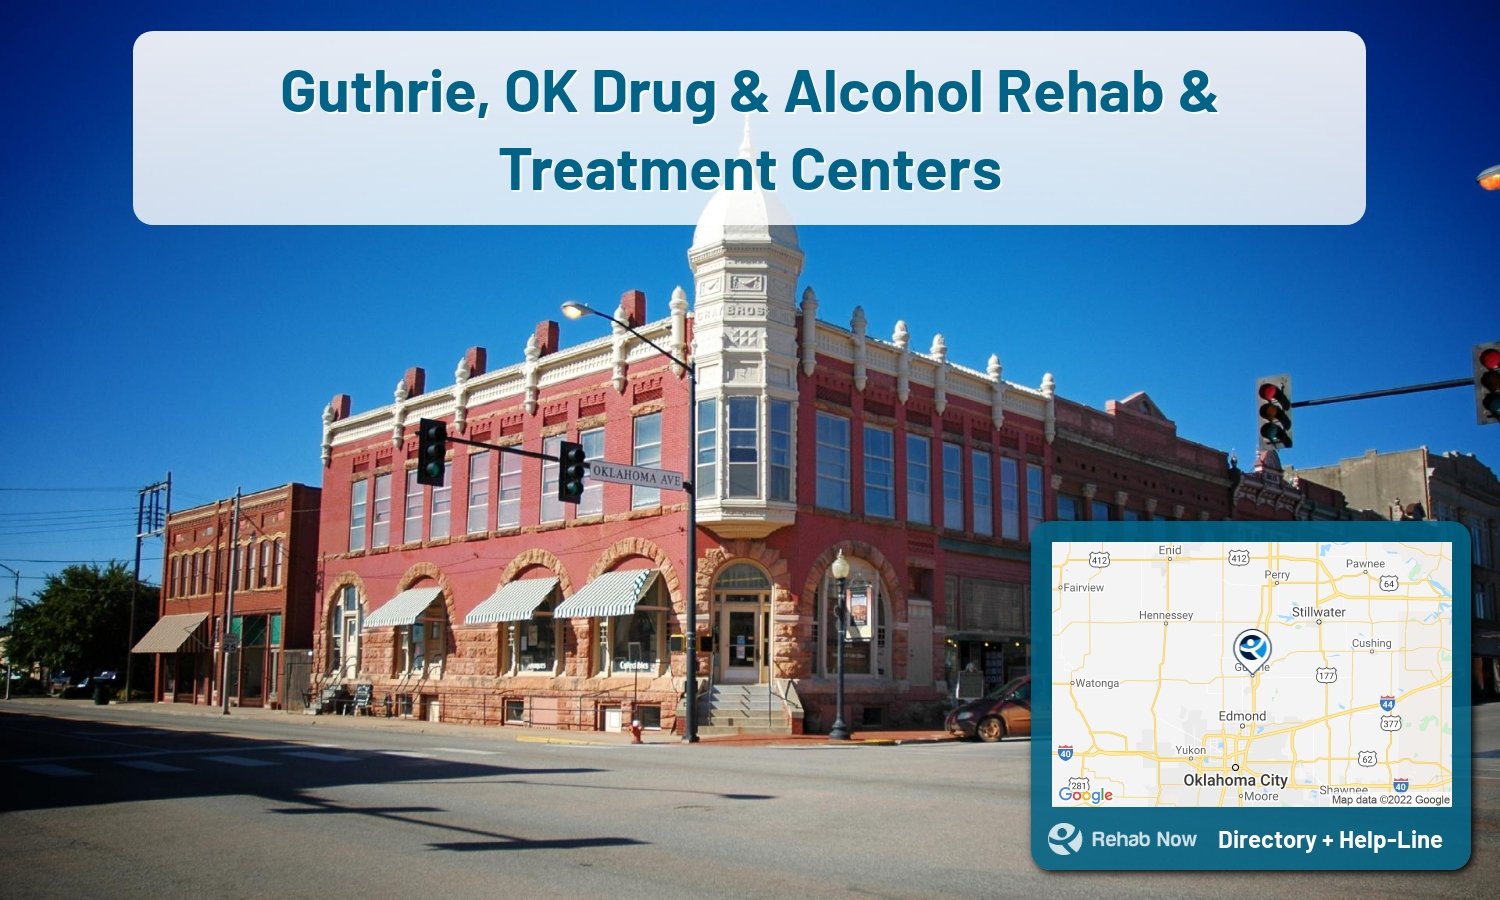 Drug rehab and alcohol treatment services nearby Guthrie, OK. Need help choosing a treatment program? Call our free hotline!